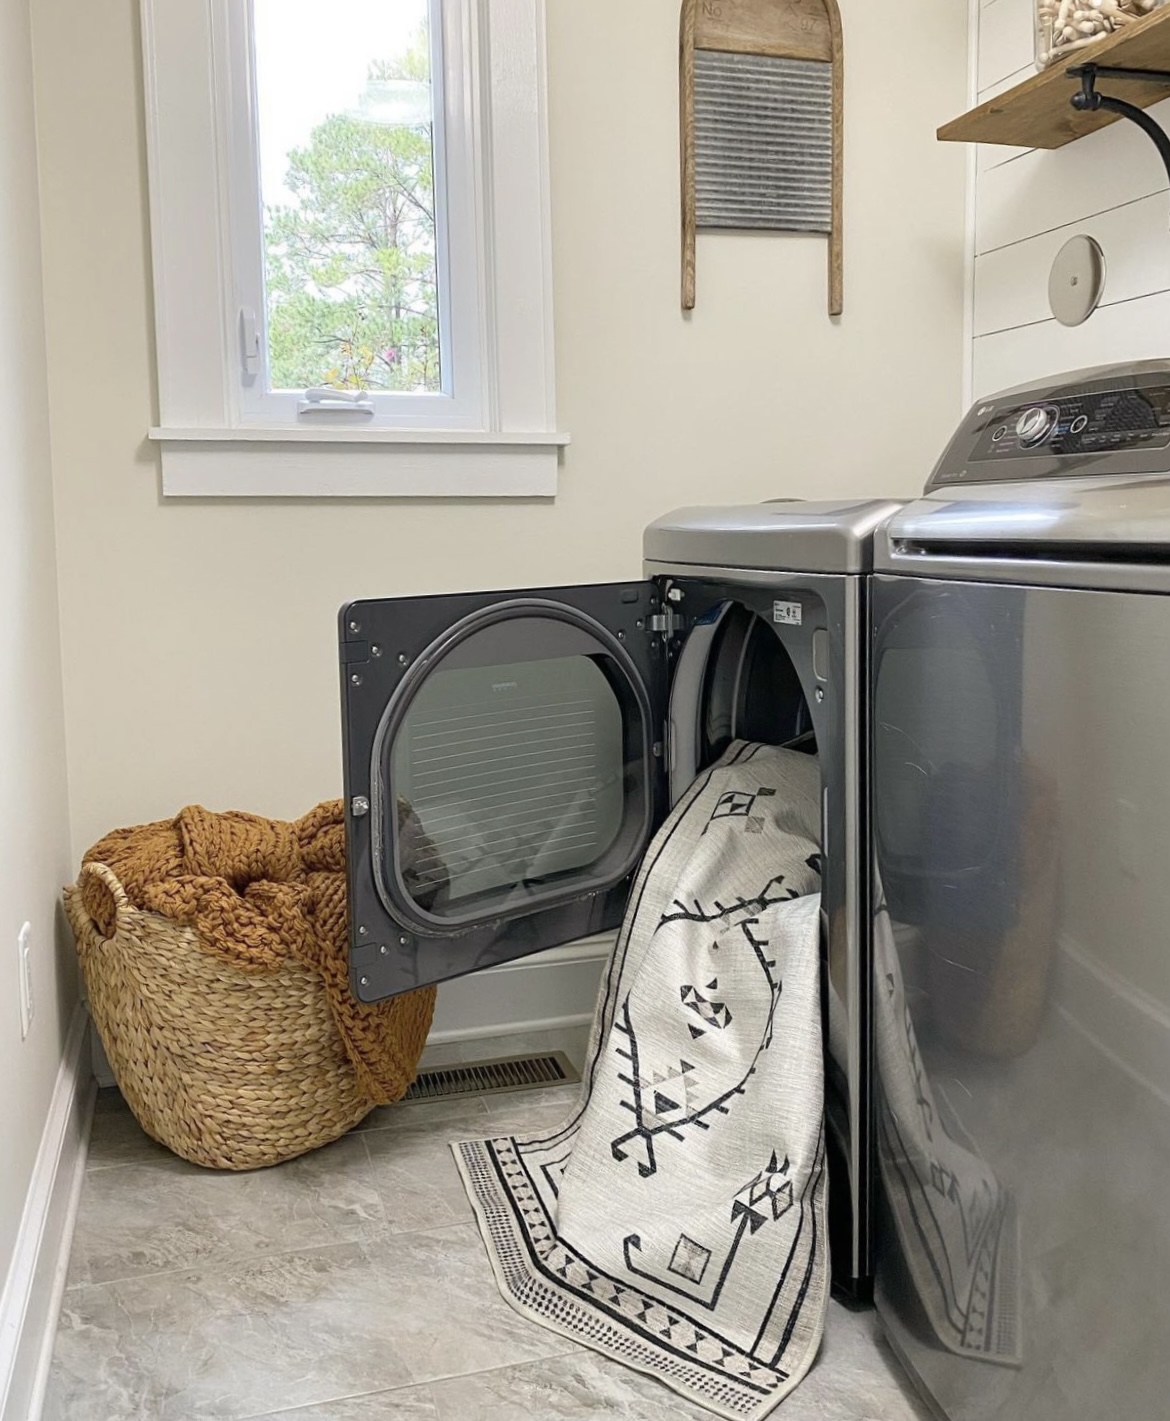 A washable rug coming out the dryer in the laundry room.